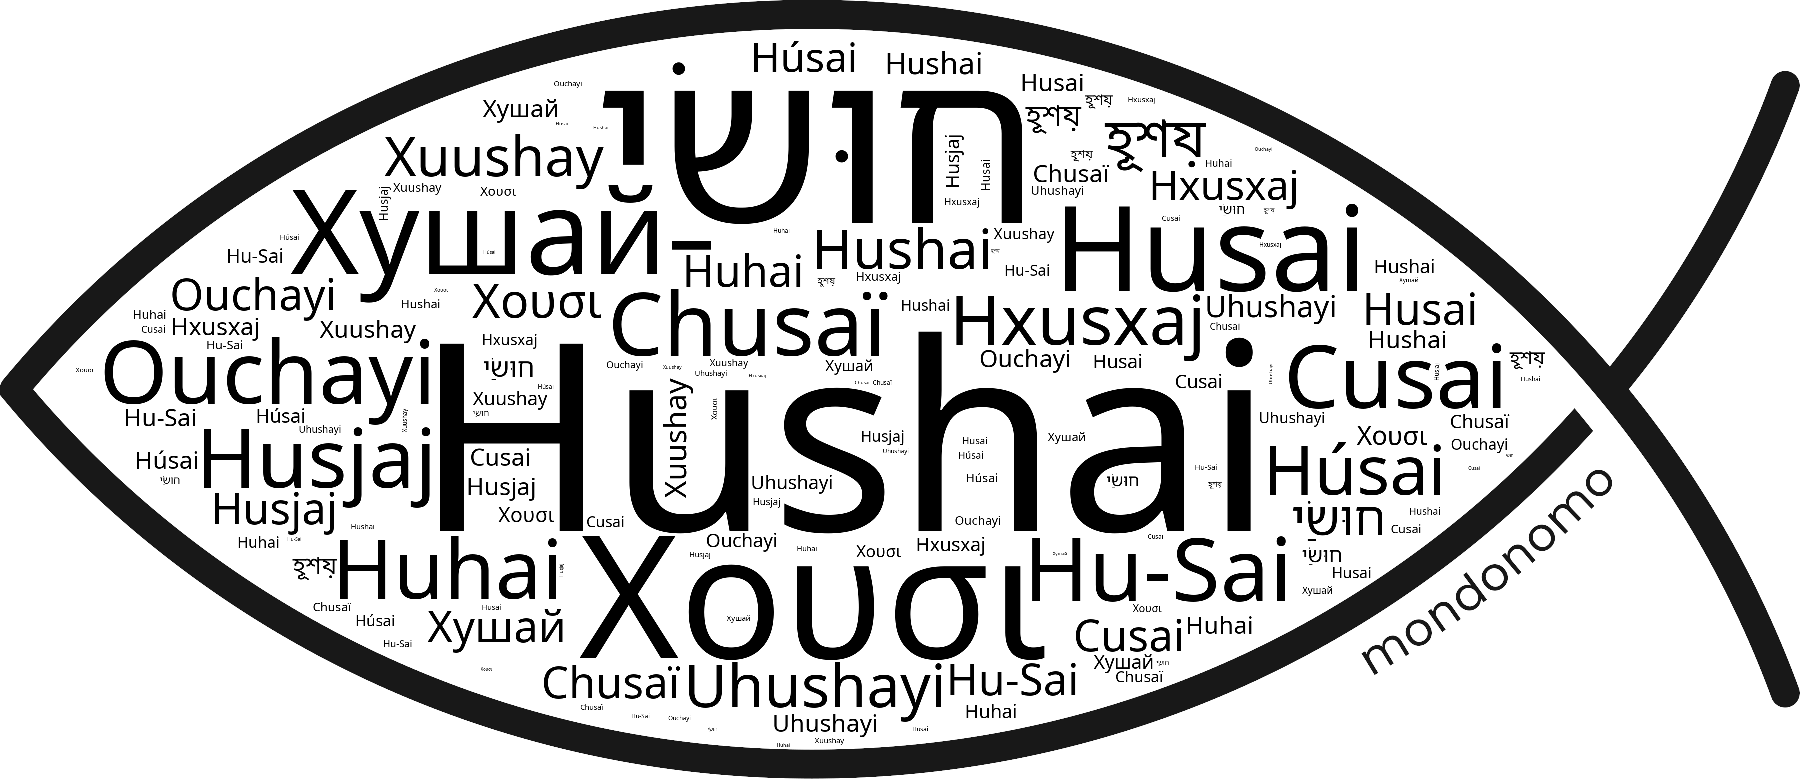 Name Hushai in the world's Bibles